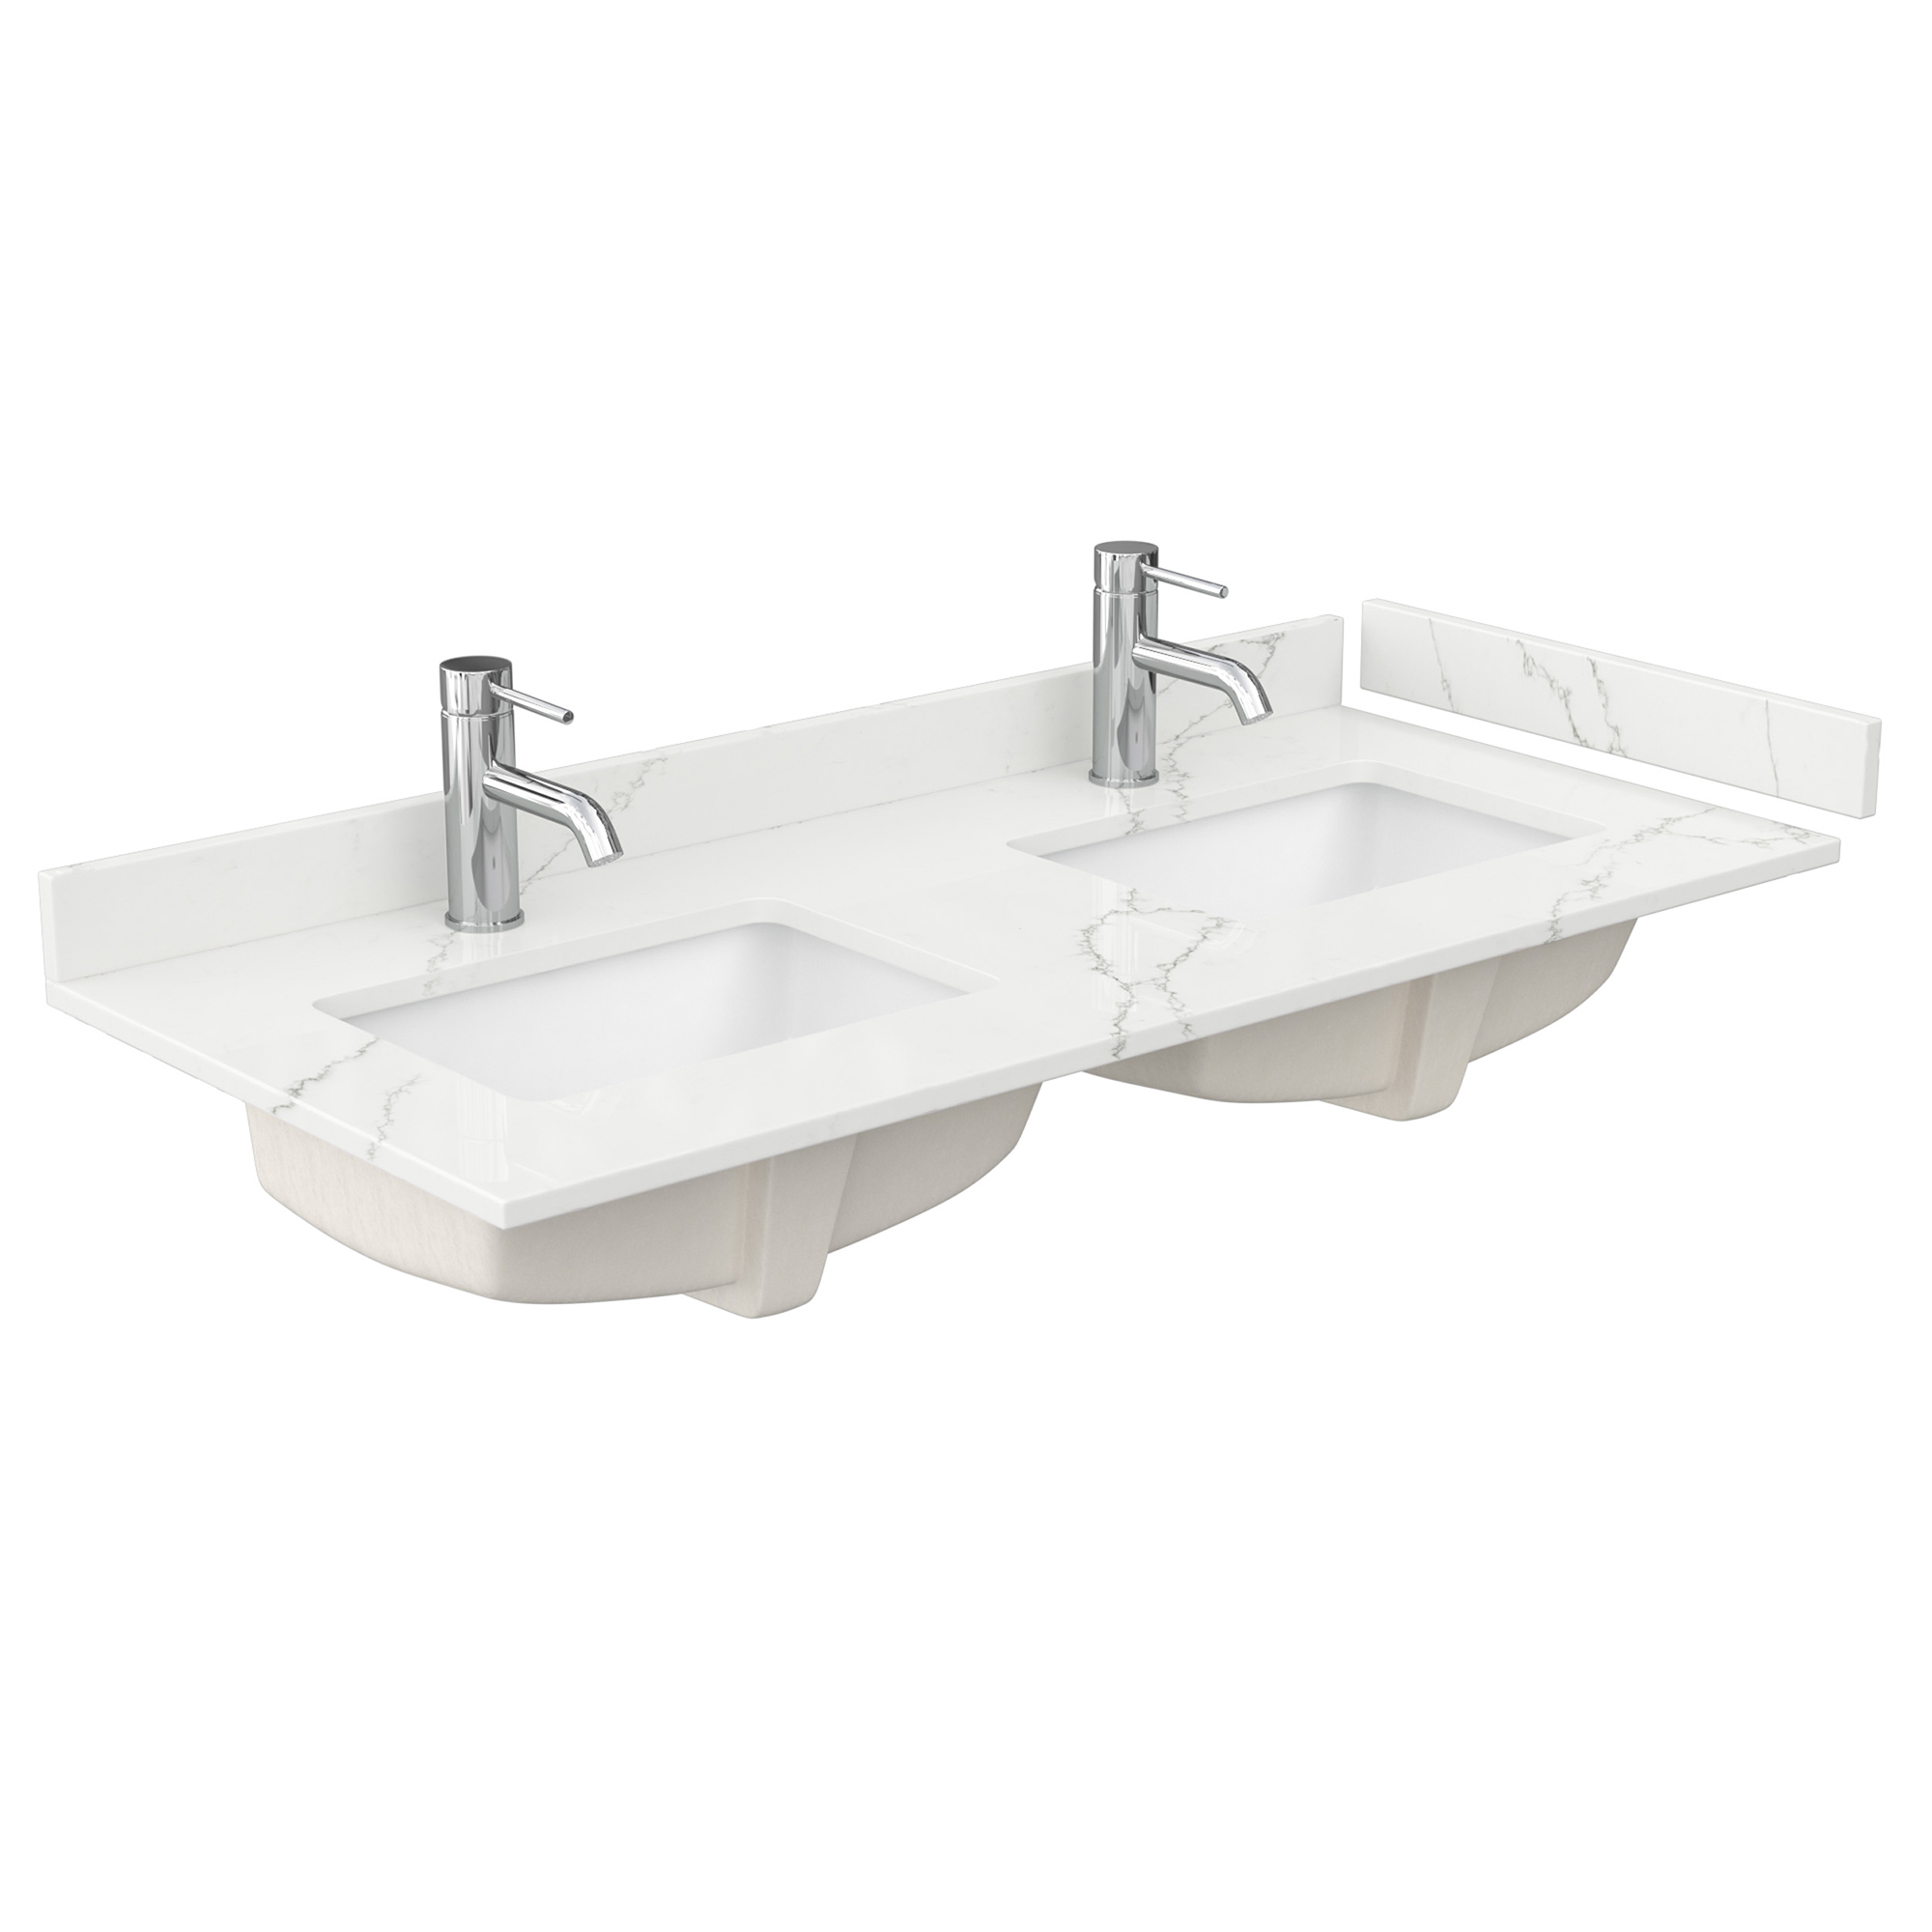 48" Double Countertop - Giotto Quartz (8066) with Undermount Square Sinks (1-Hole) - Includes Backsplash and Sidesplash WCFQC148DTOPUNSGT